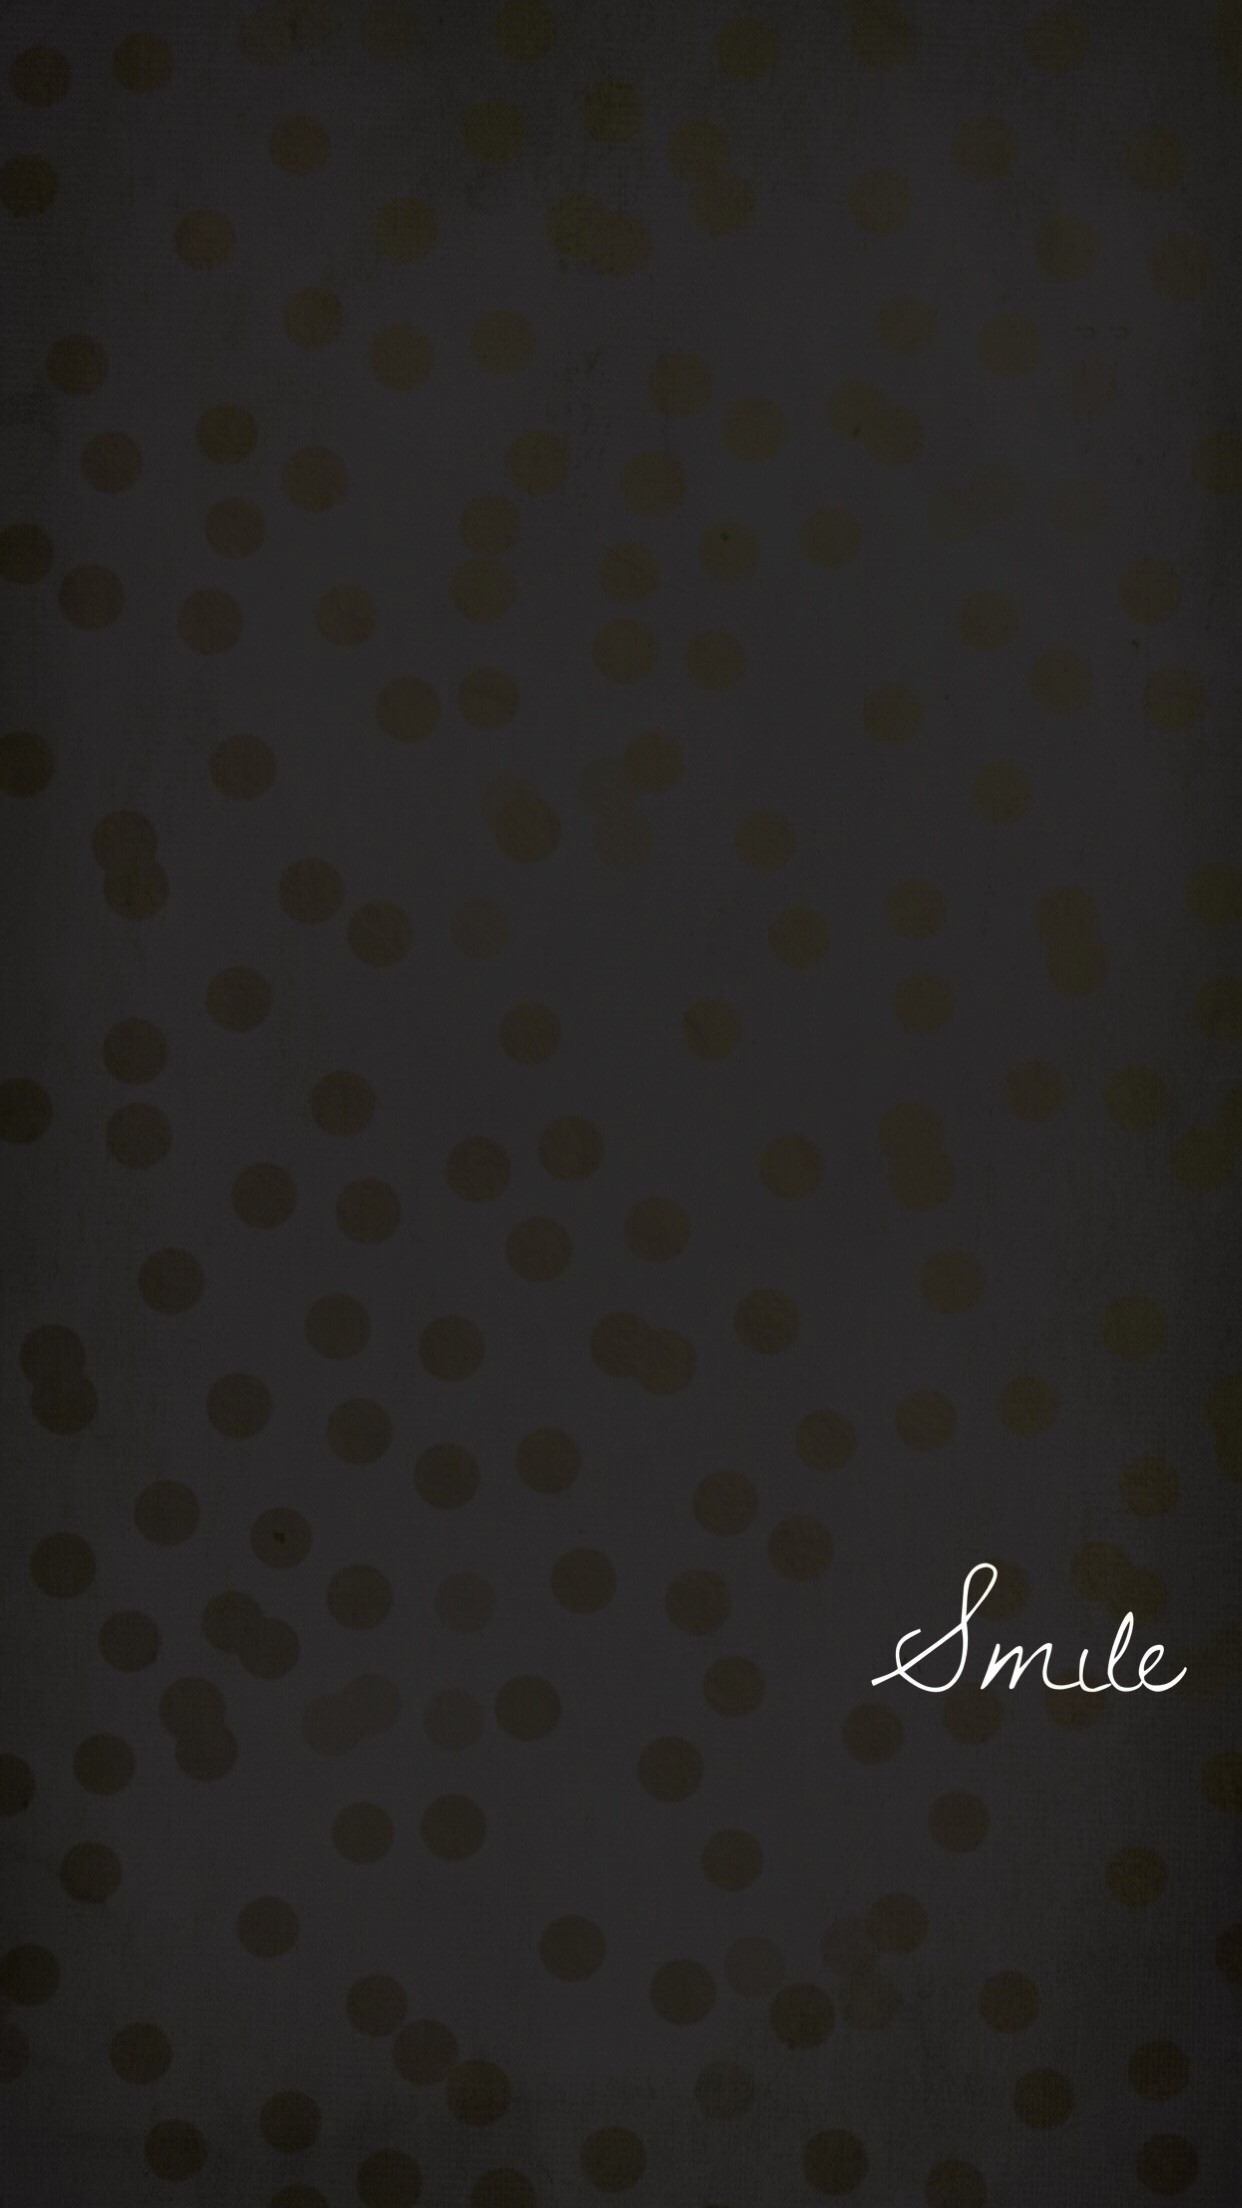 1242x2208 smile, wallpaper, background, black, gold, iphone